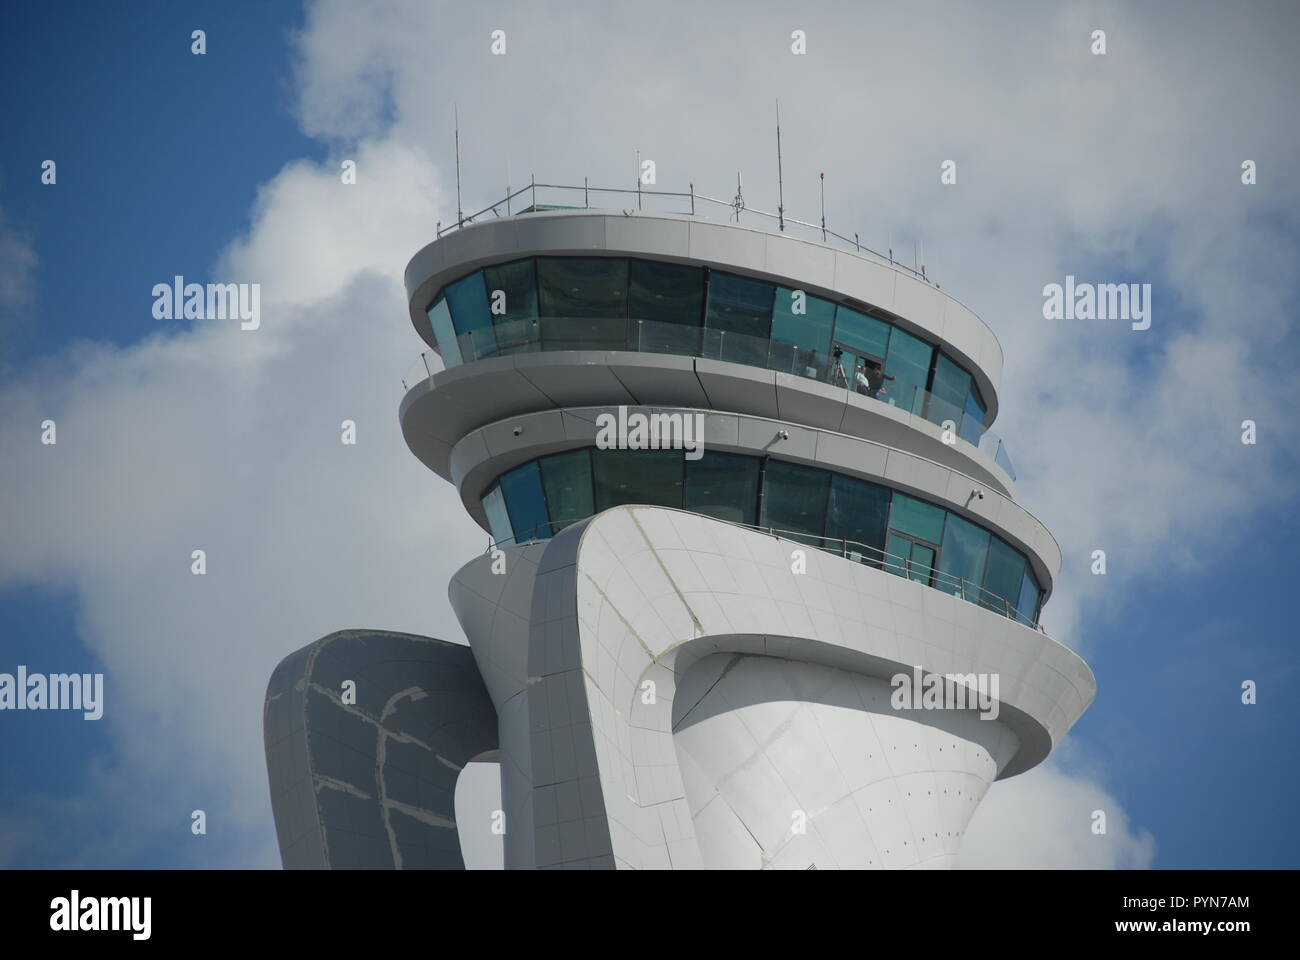 Air Traffic Control Tower of Istanbul, IGA New Airport during the Teknofest Technology and Aviation Fair on September 20, 2018. Stock Photo